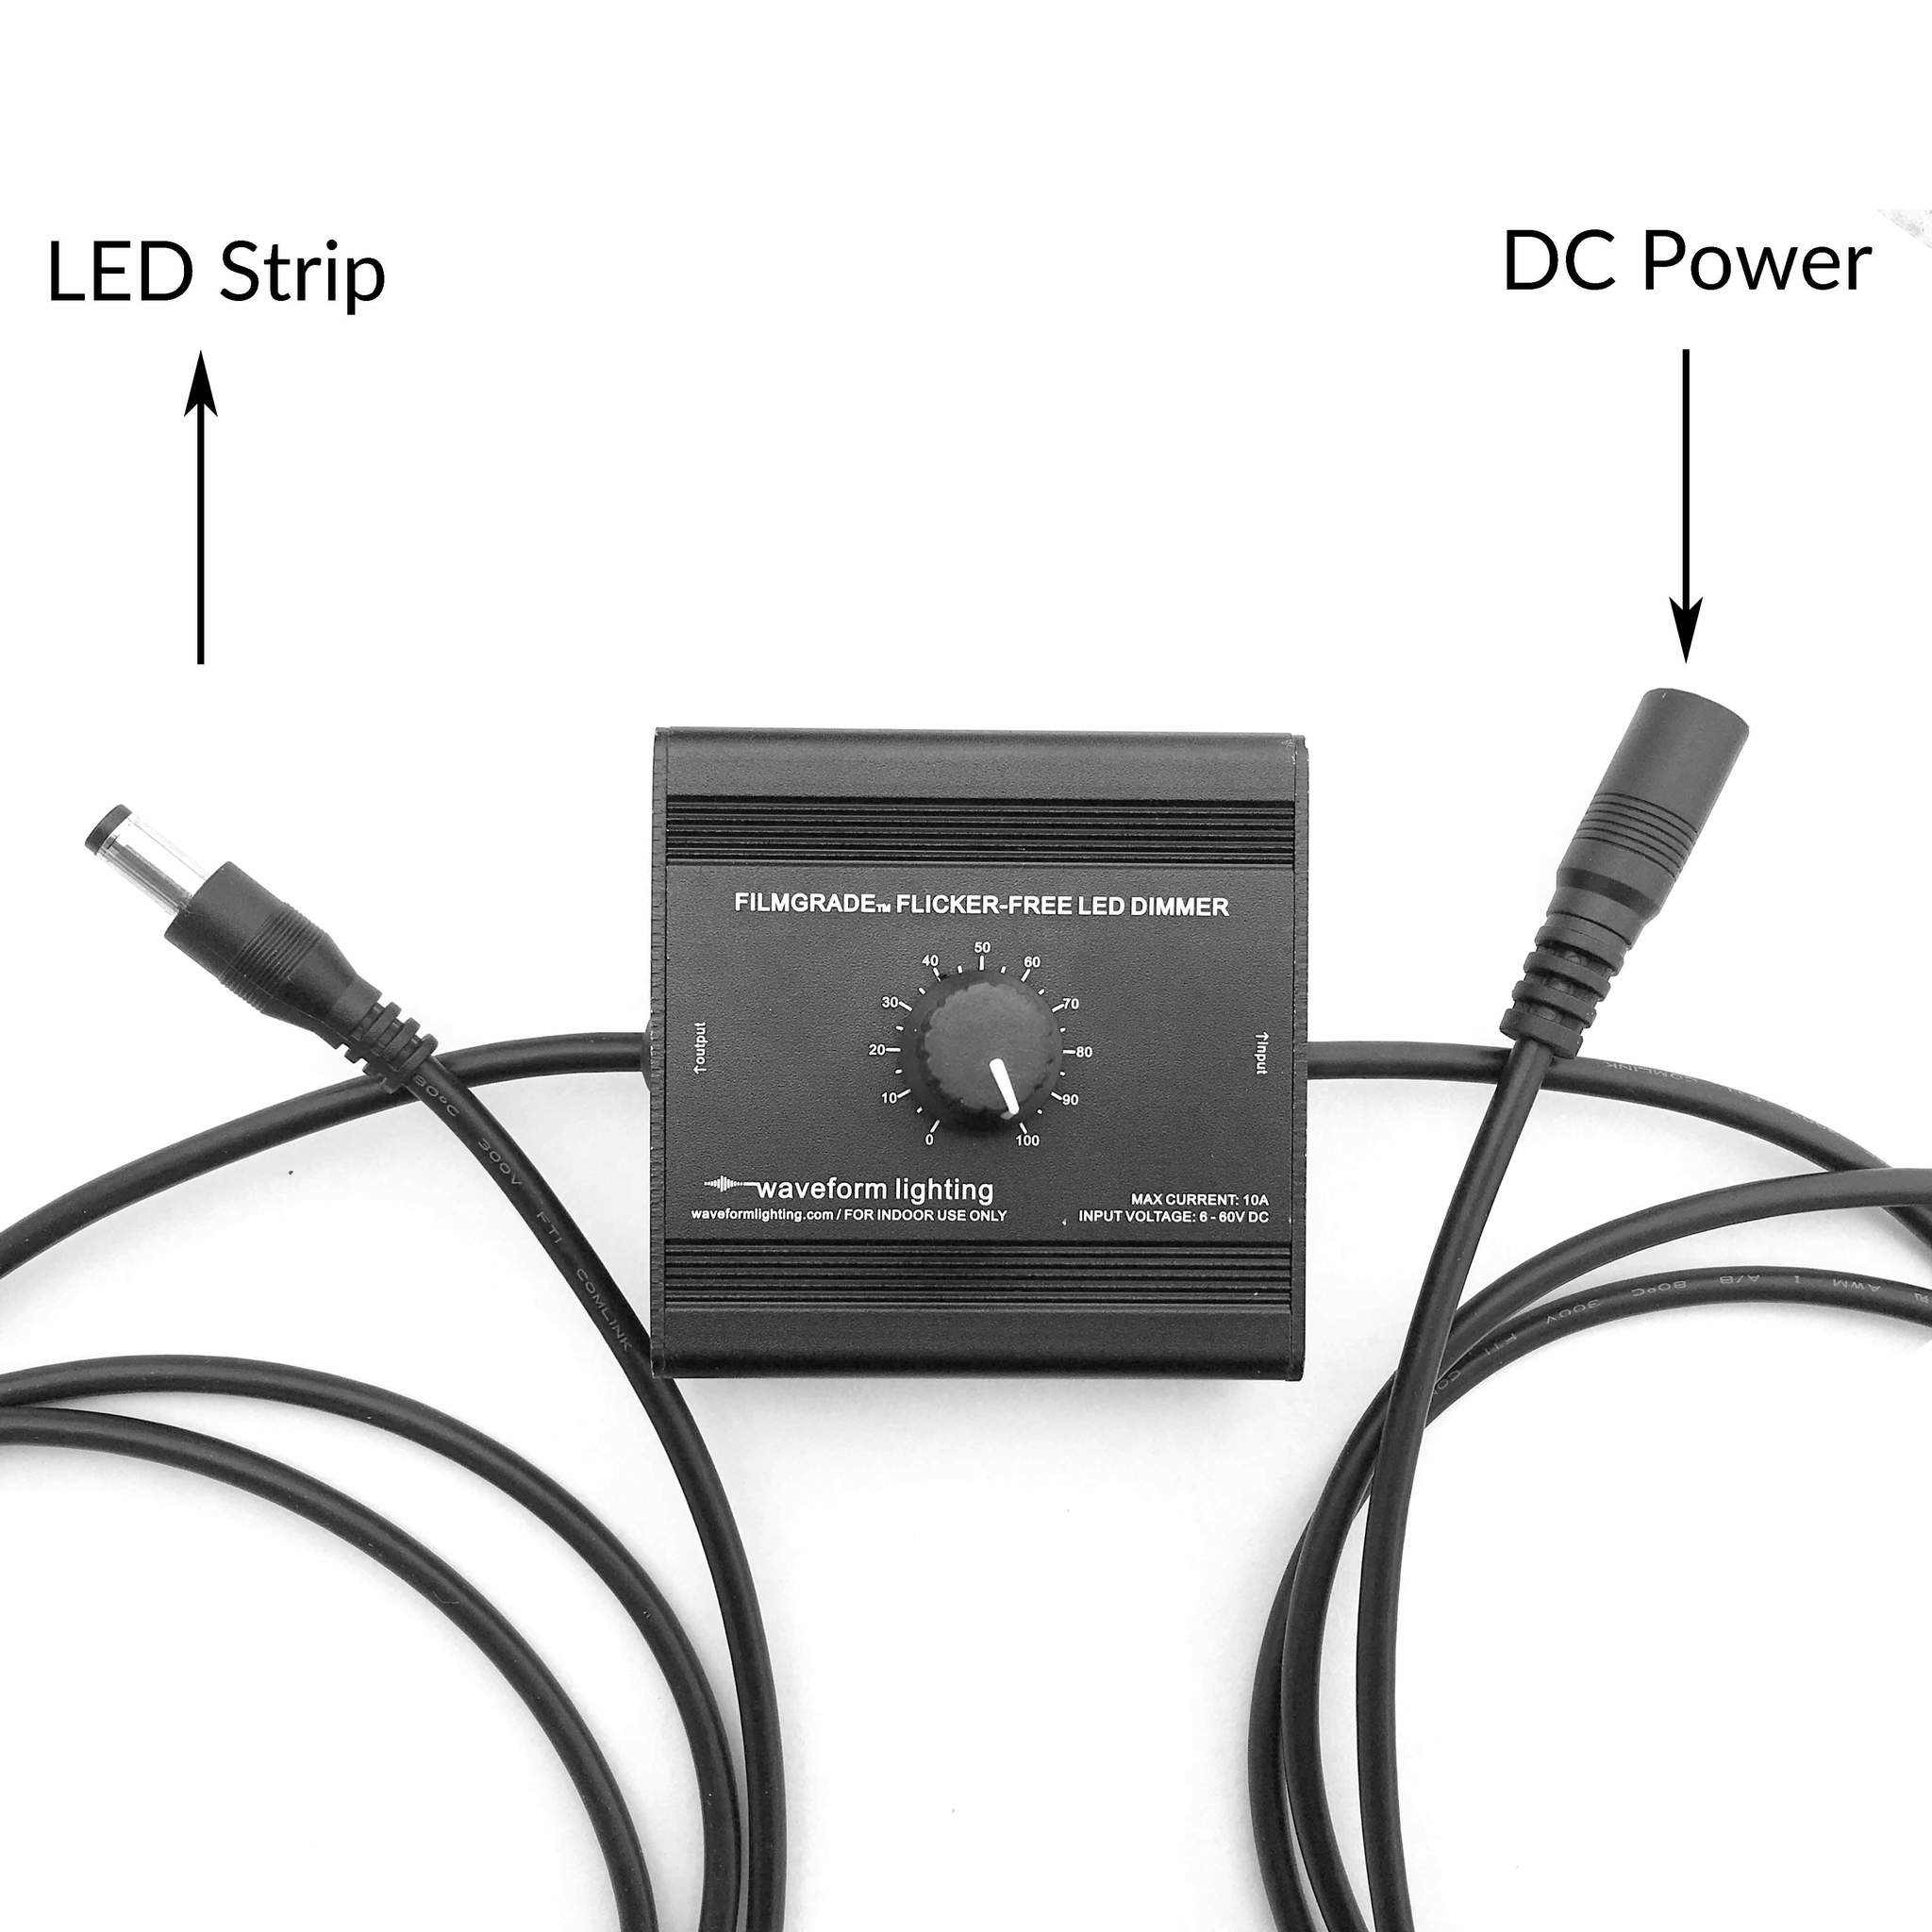 LED Strip - Connecting the LED Power Supply and LED Dimmer 